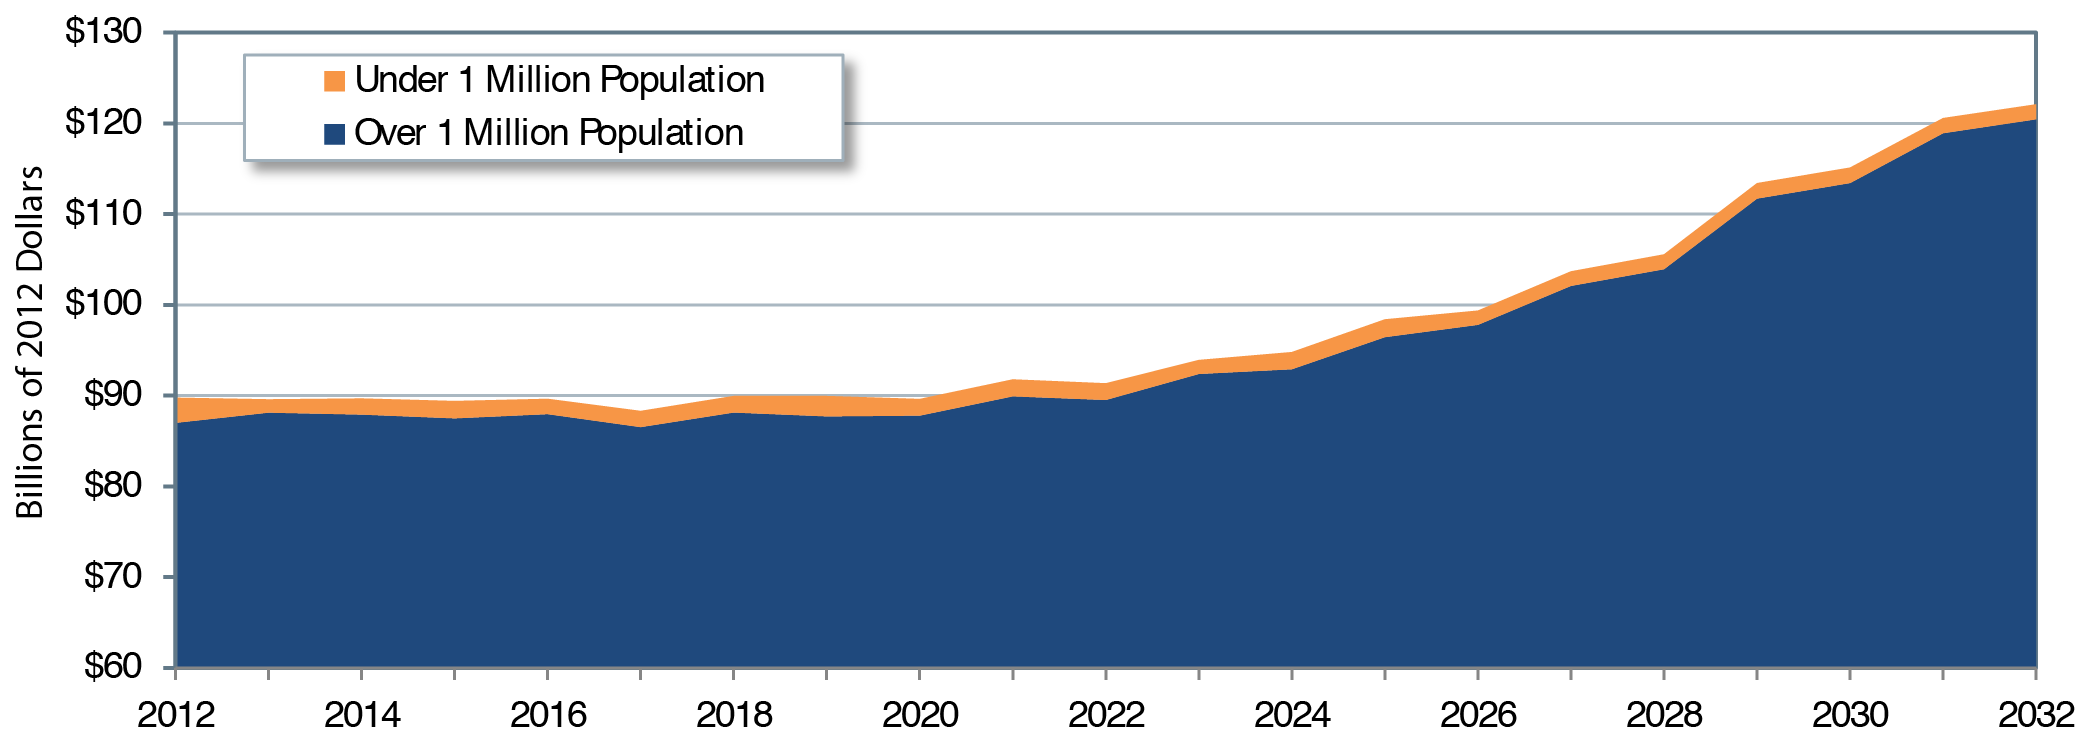 An area graph plots values for the investment backlog in billions of 2012 dollars for transit projects in two categories of population size over time from 2012 to 2032. The plot for investment backlog in areas with a population over 1 million has an initial value of $87 billion in the year 2012, swings upward to a value of $87.8 billion in the year 2020, trends higher thereafter to reach a value of $102.0 billion in the year 2027, and swings higher to end at a value of $120.5 billion in the year 2032. The plot for investment backlog in areas with a population under 1 million has an initial value of $2.8 billion in the year 2012 and generally decreased to a value of $1.7 billion in the year 2032: Transit Economic Requirements Model. 